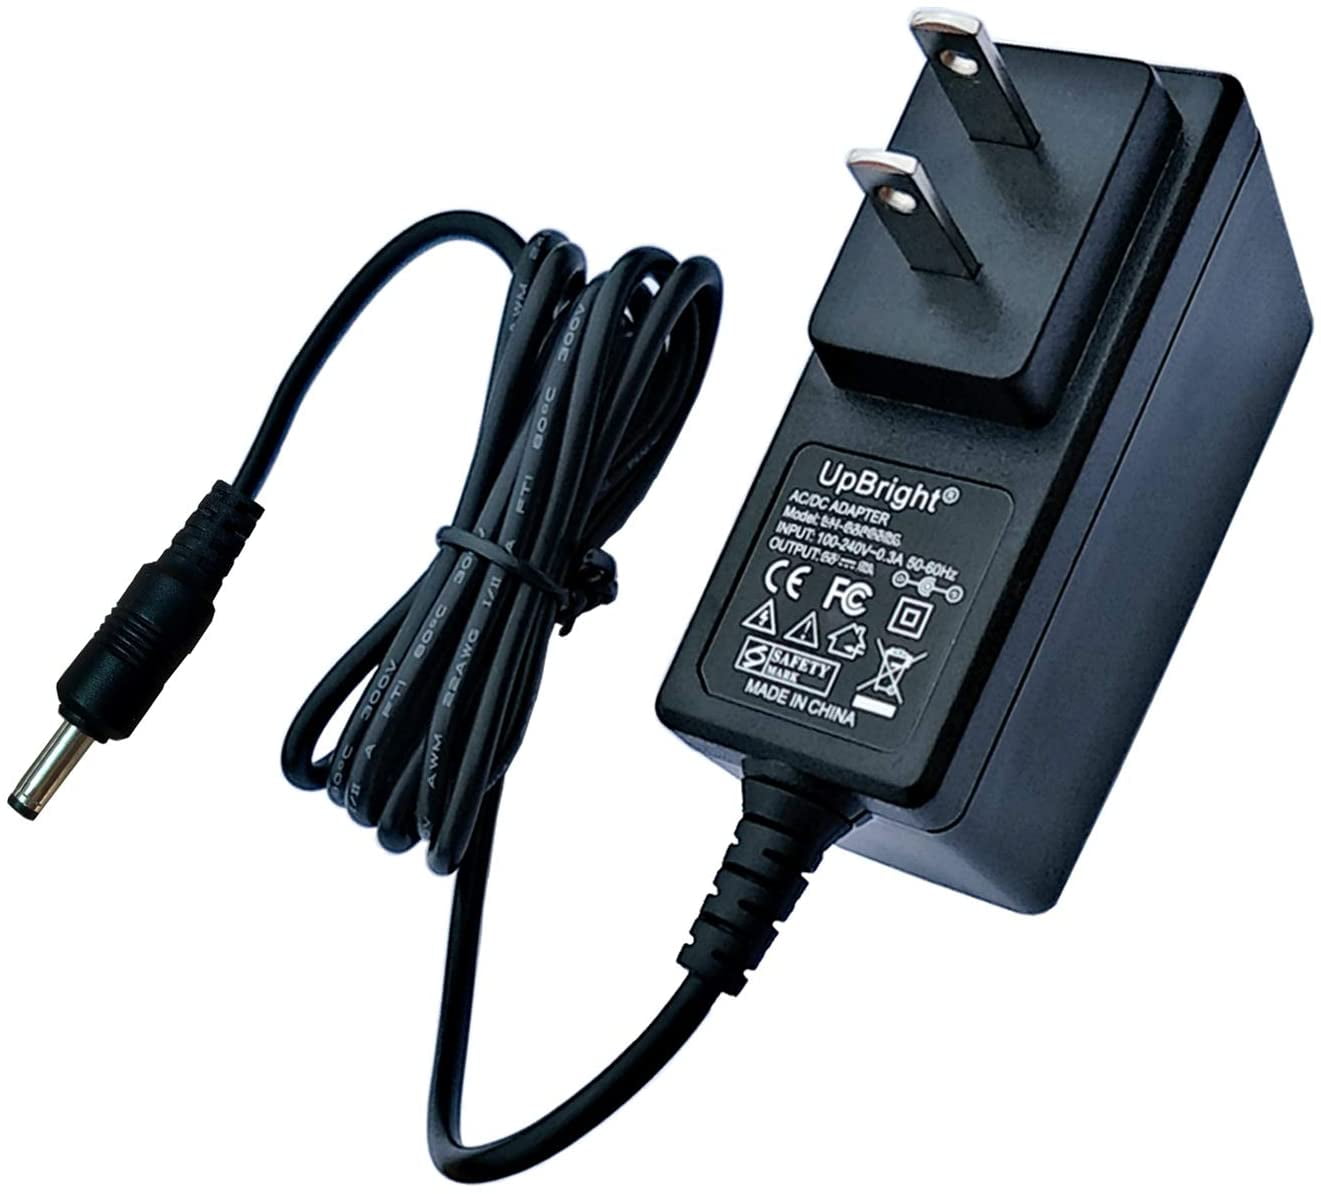 AC DC Adapter for Supersonic sc-1331 SC1331 13.3 Widescreen LCD LED TV HDTV PSU 